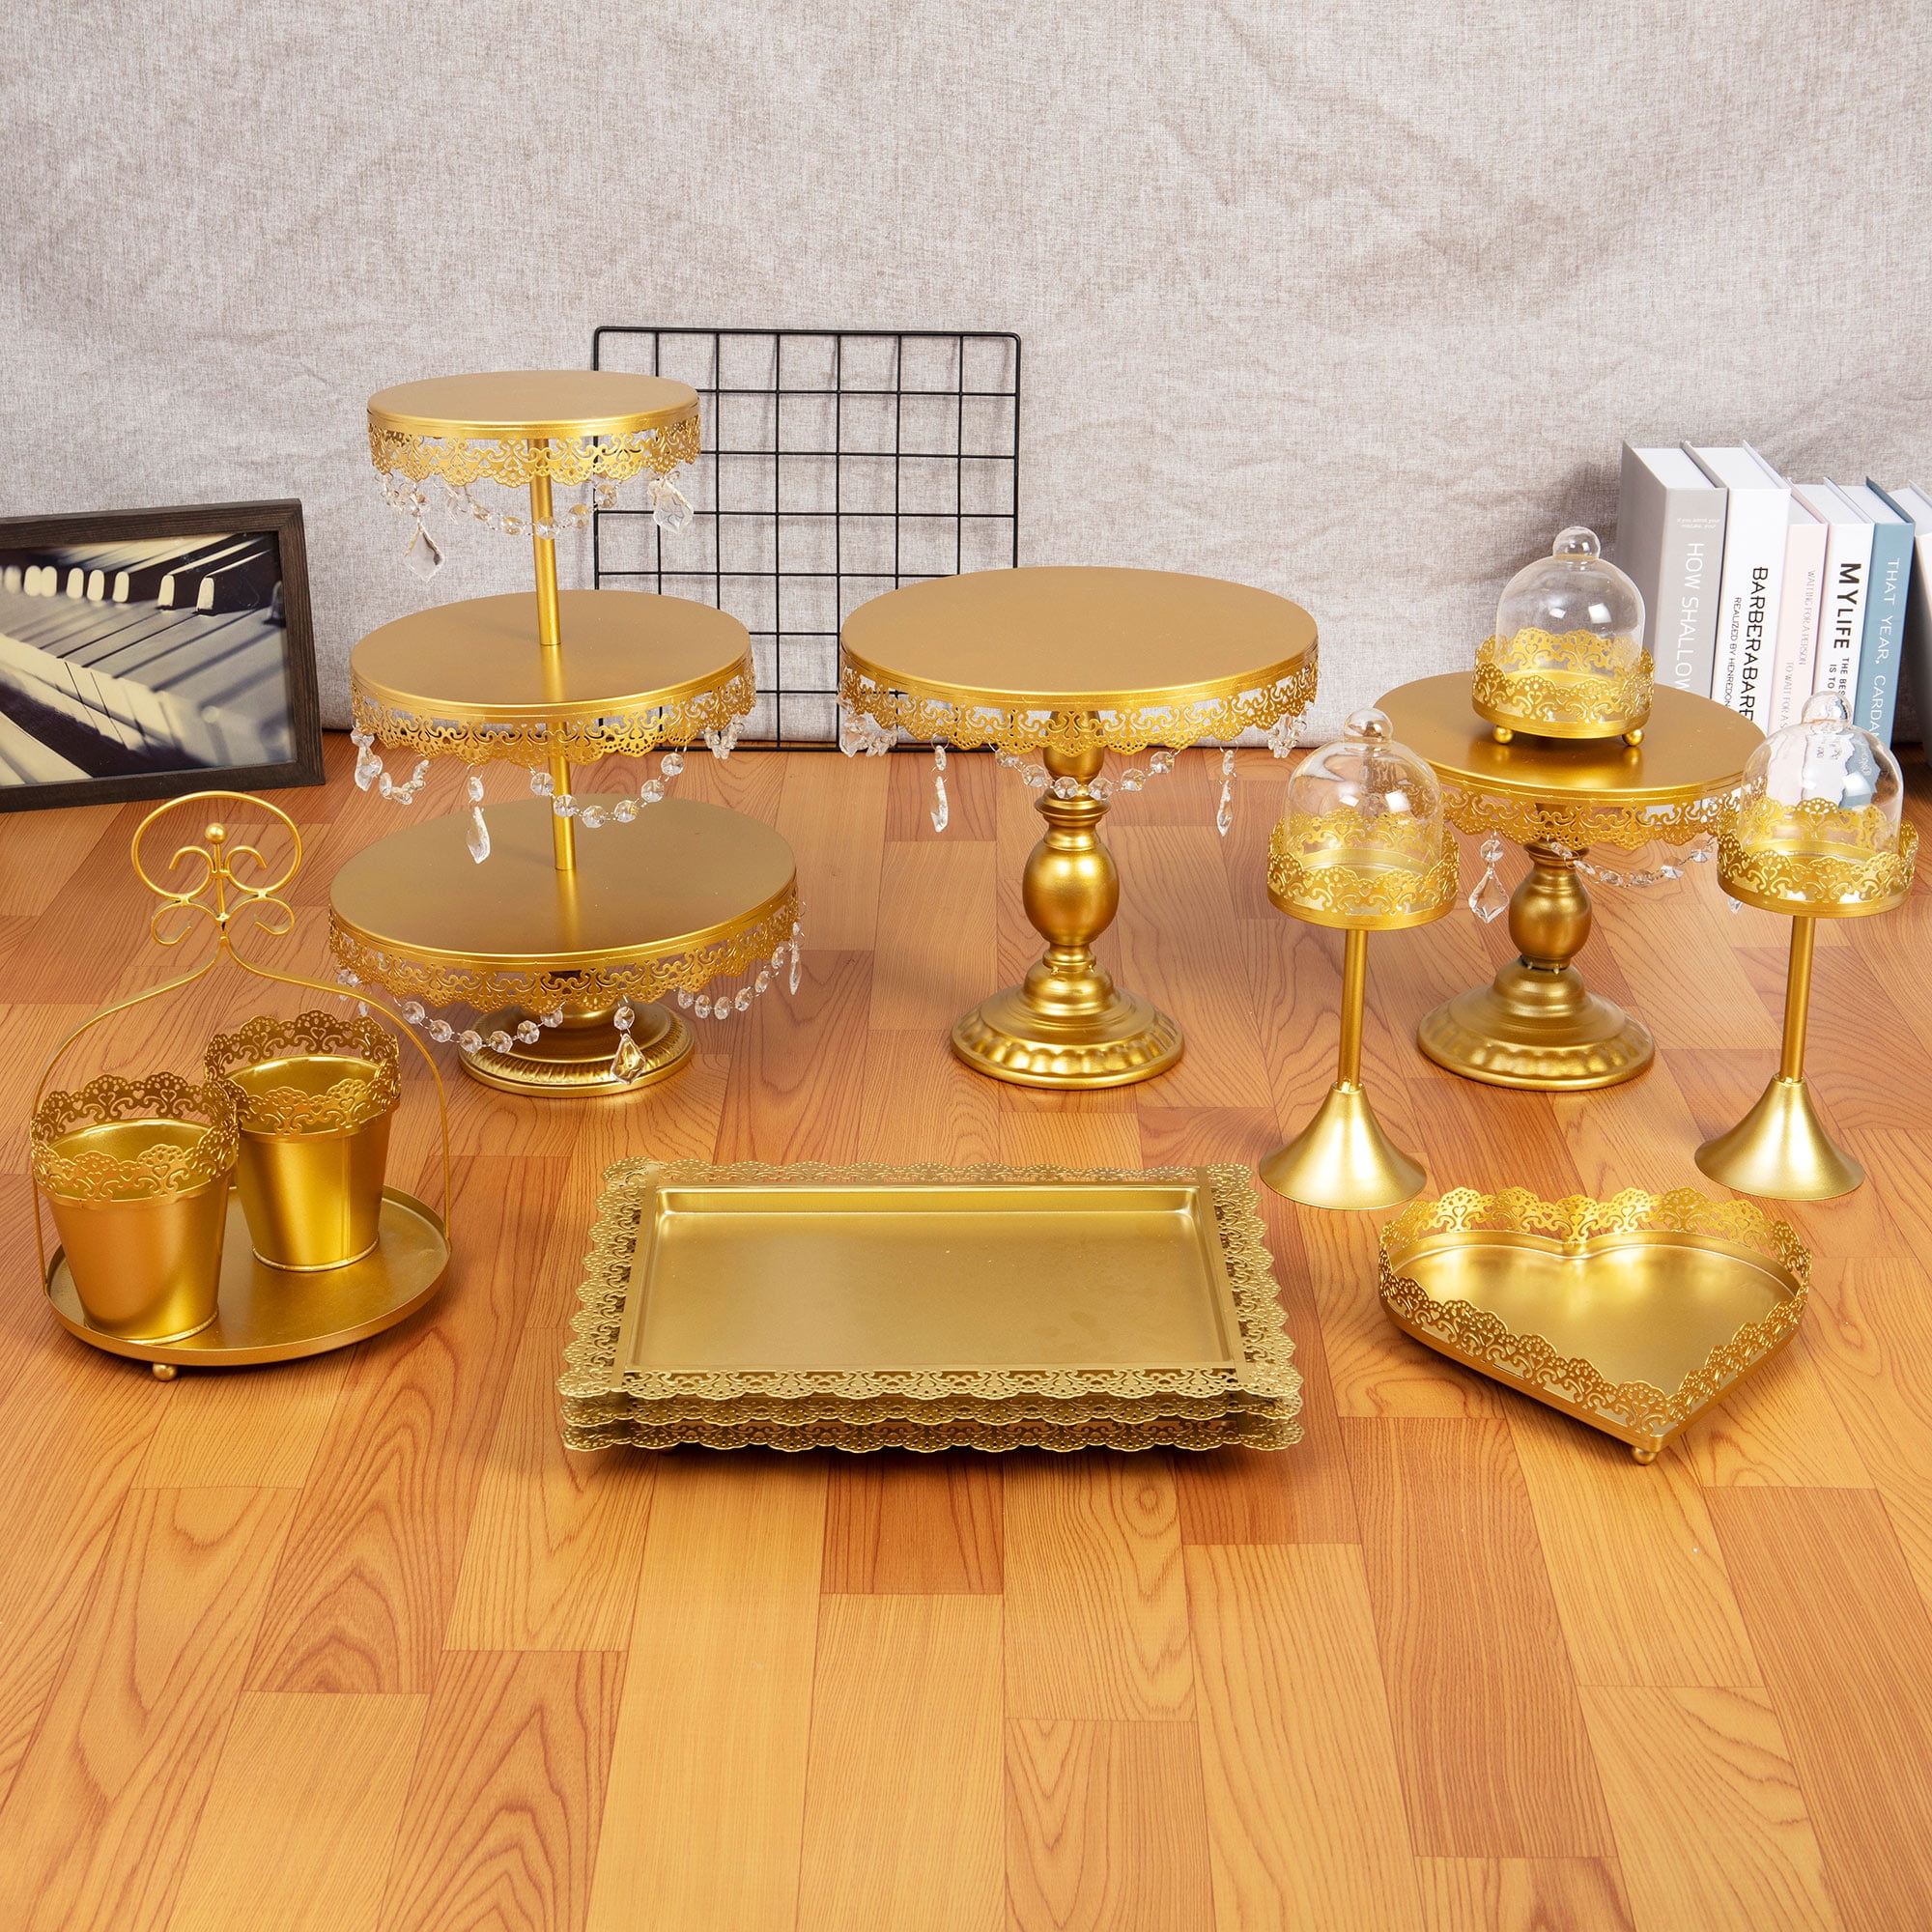 12PCS Metal Cake Holders Antique Gold Cupcake Stand Wedding Party Display Decor 